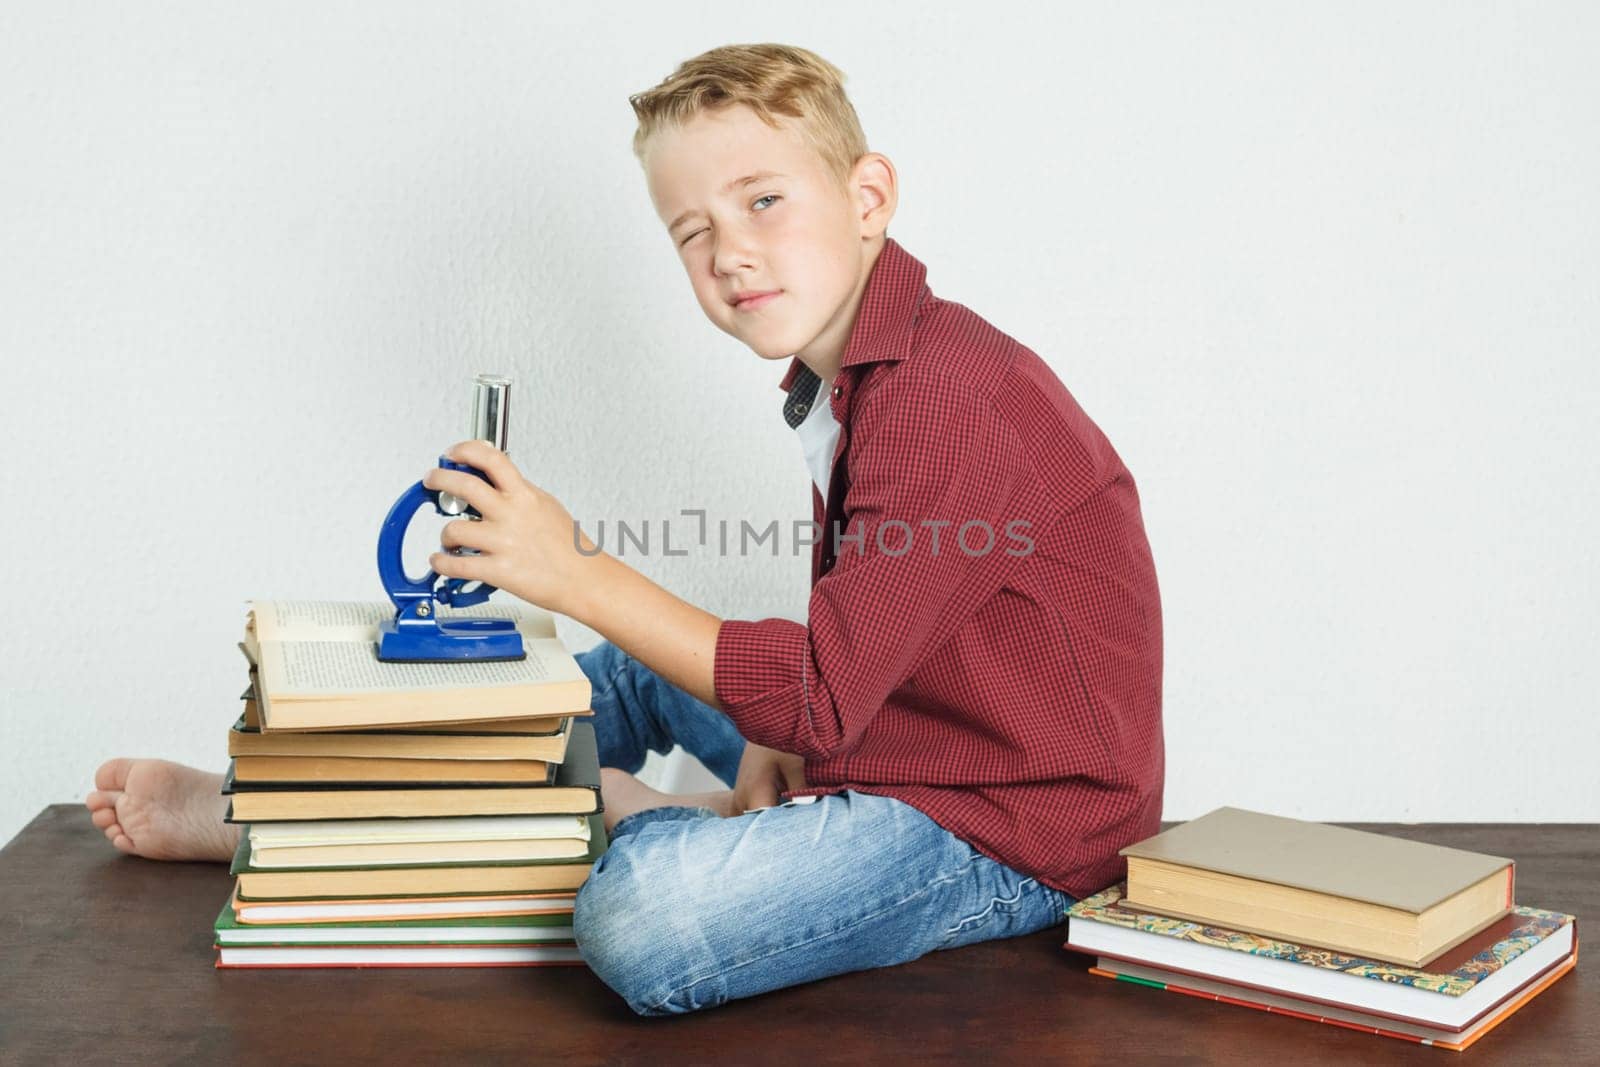 A schoolboy sits at a table near books, holds a microscope in his hands and looks at the camera. by Sd28DimoN_1976